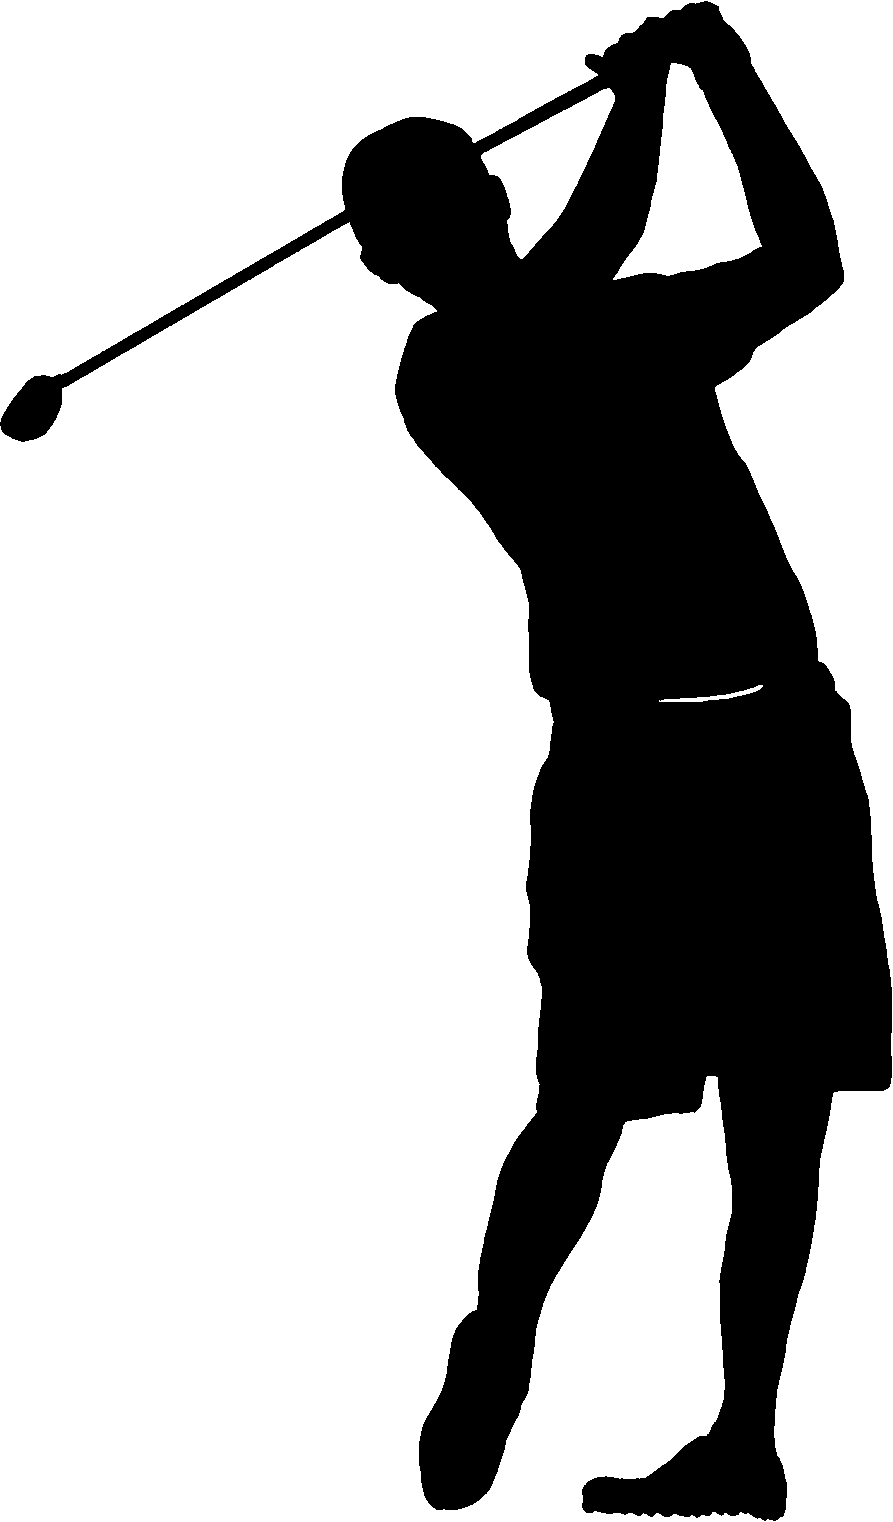 Golf Graphics - Clipart library